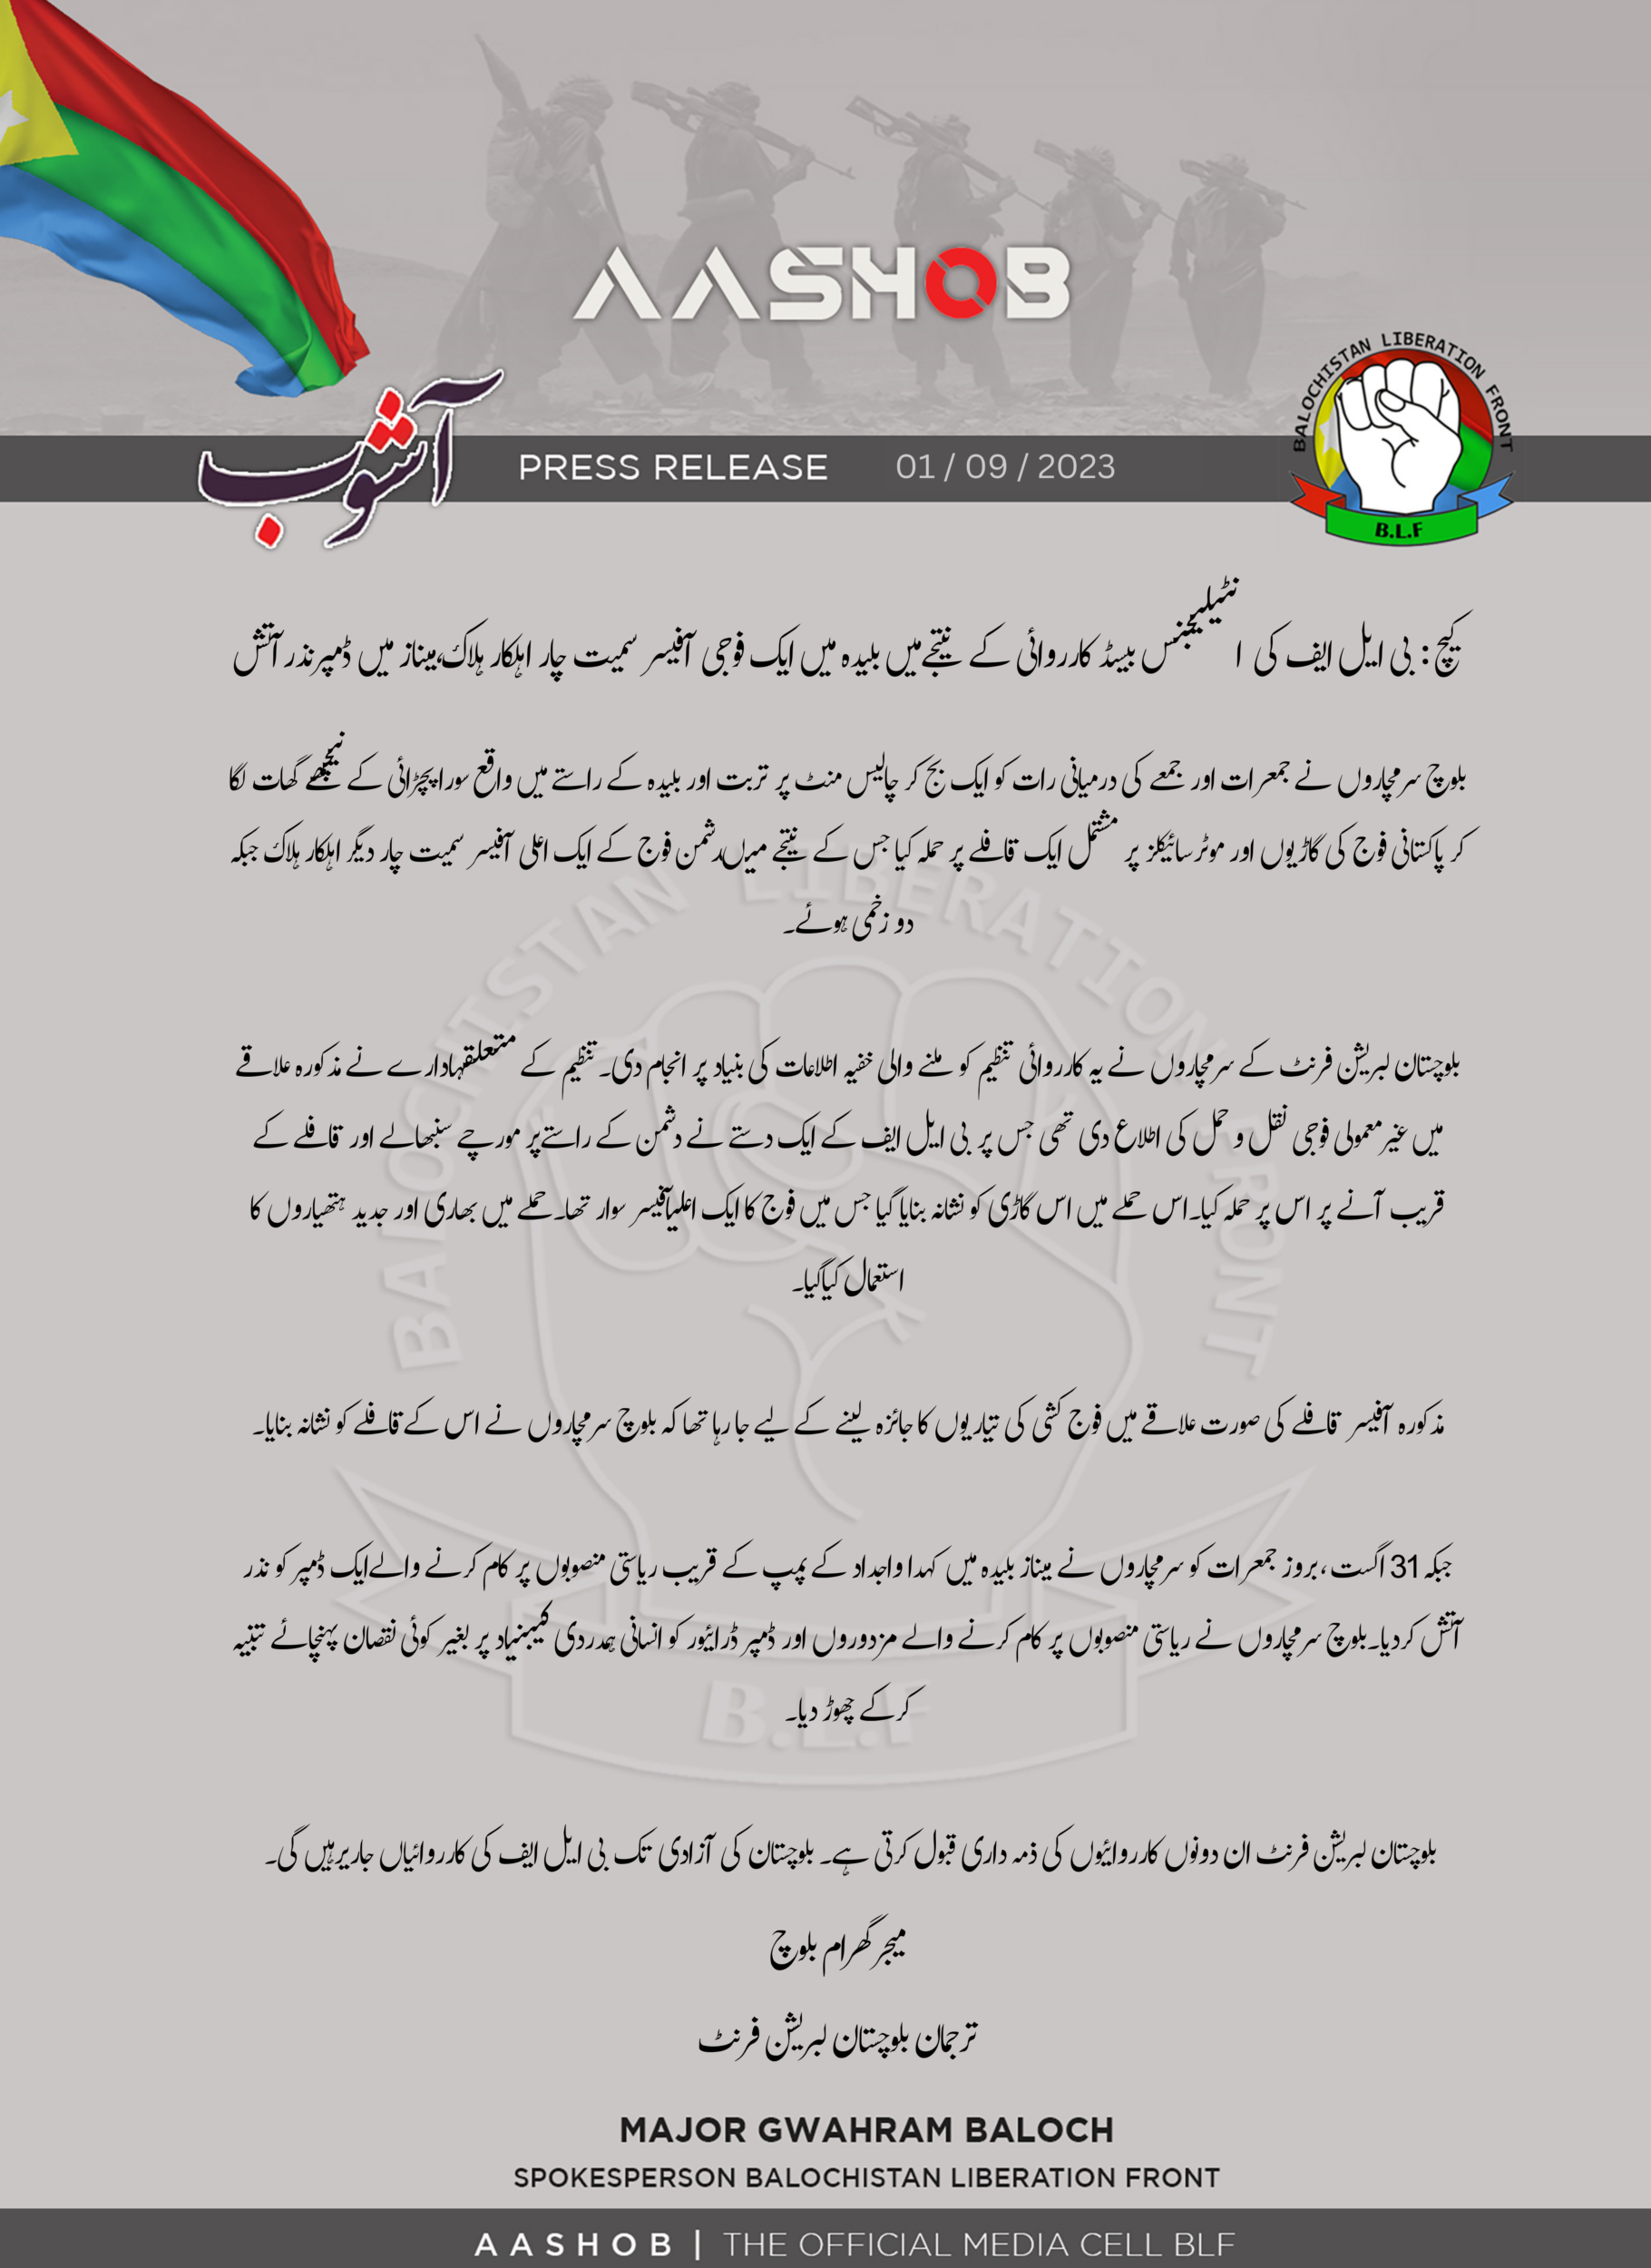 (Claim) Balochistan Liberation Front (BLF) Claims Two Separate Attacks: BLF Ambushed a Convoy of Pakistani Army Vehicles in Buleda & BLF Arson of Construction Equipment in Minaz, Balochistan, Pakistan - 1 September 2023